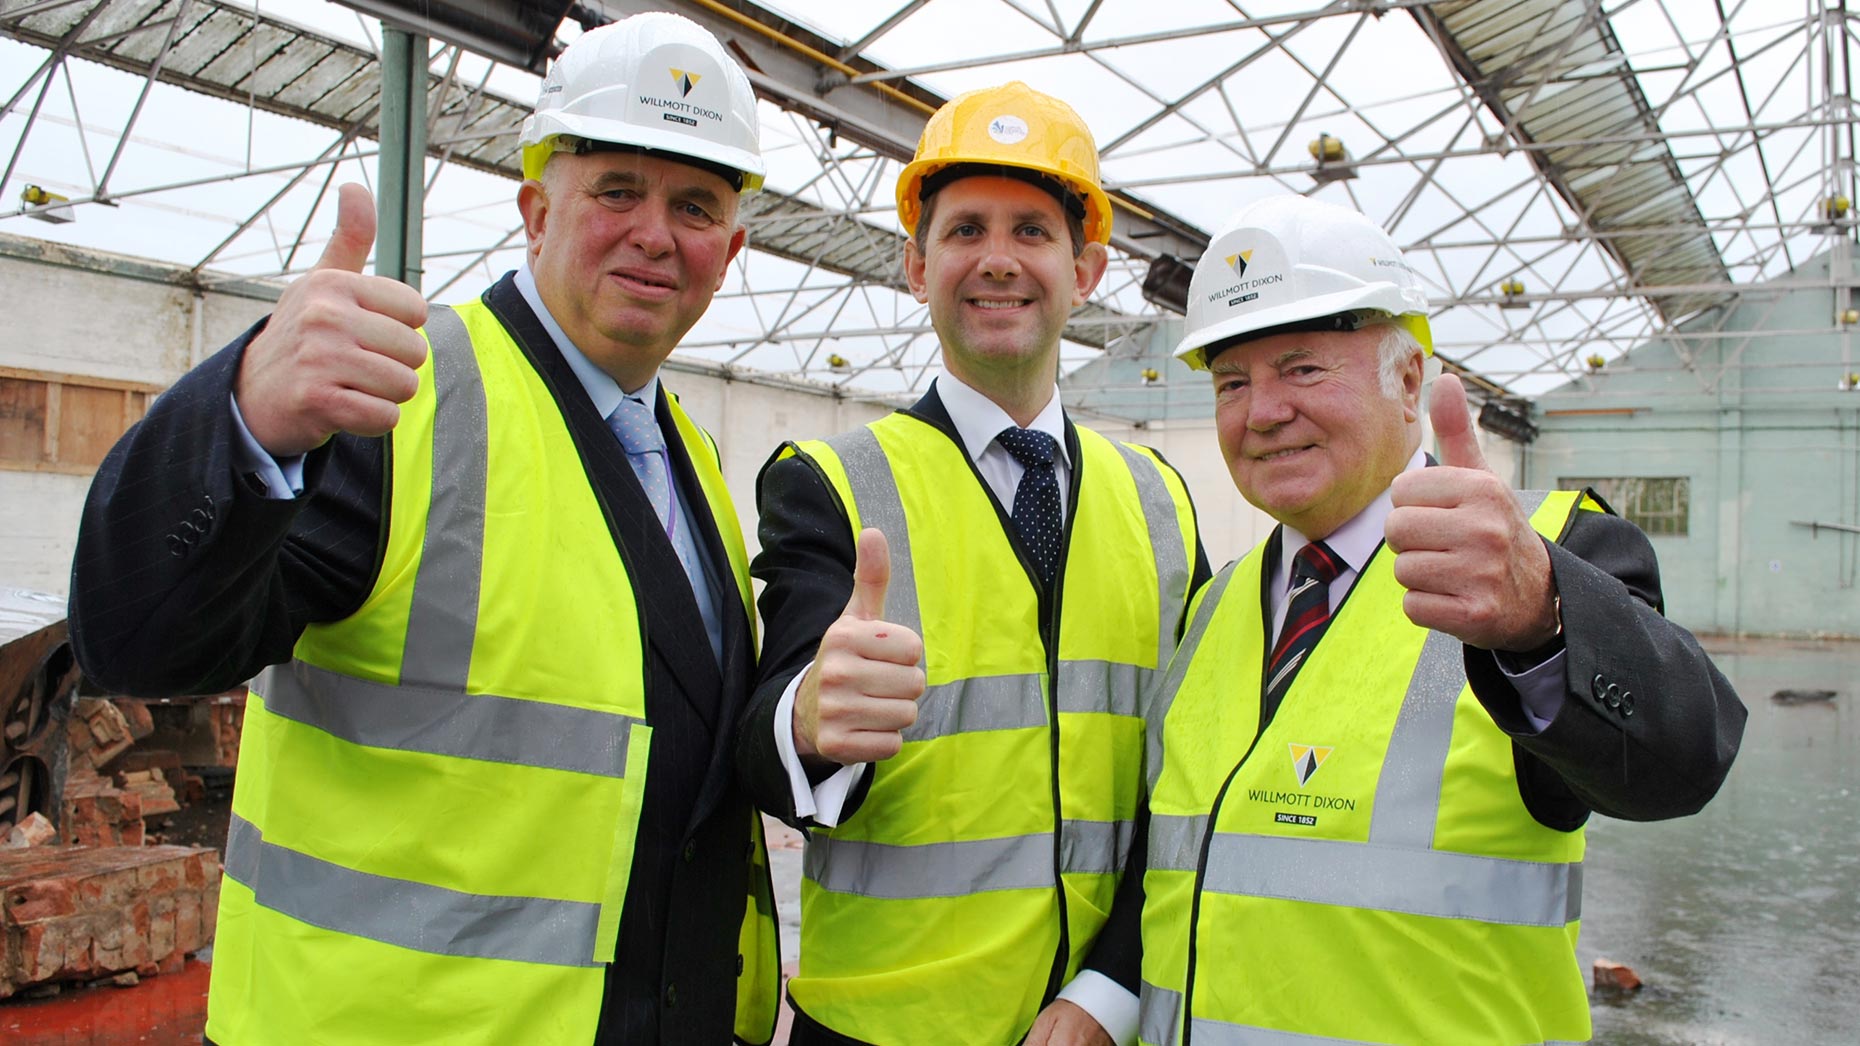 Councillor Colin Davie Executive Member for Economic Development at Lincolnshire County Council, Tom Blount Director of LSIP and David Dexter Vice Chair of the Greater Lincolnshire LEP at the demolition site